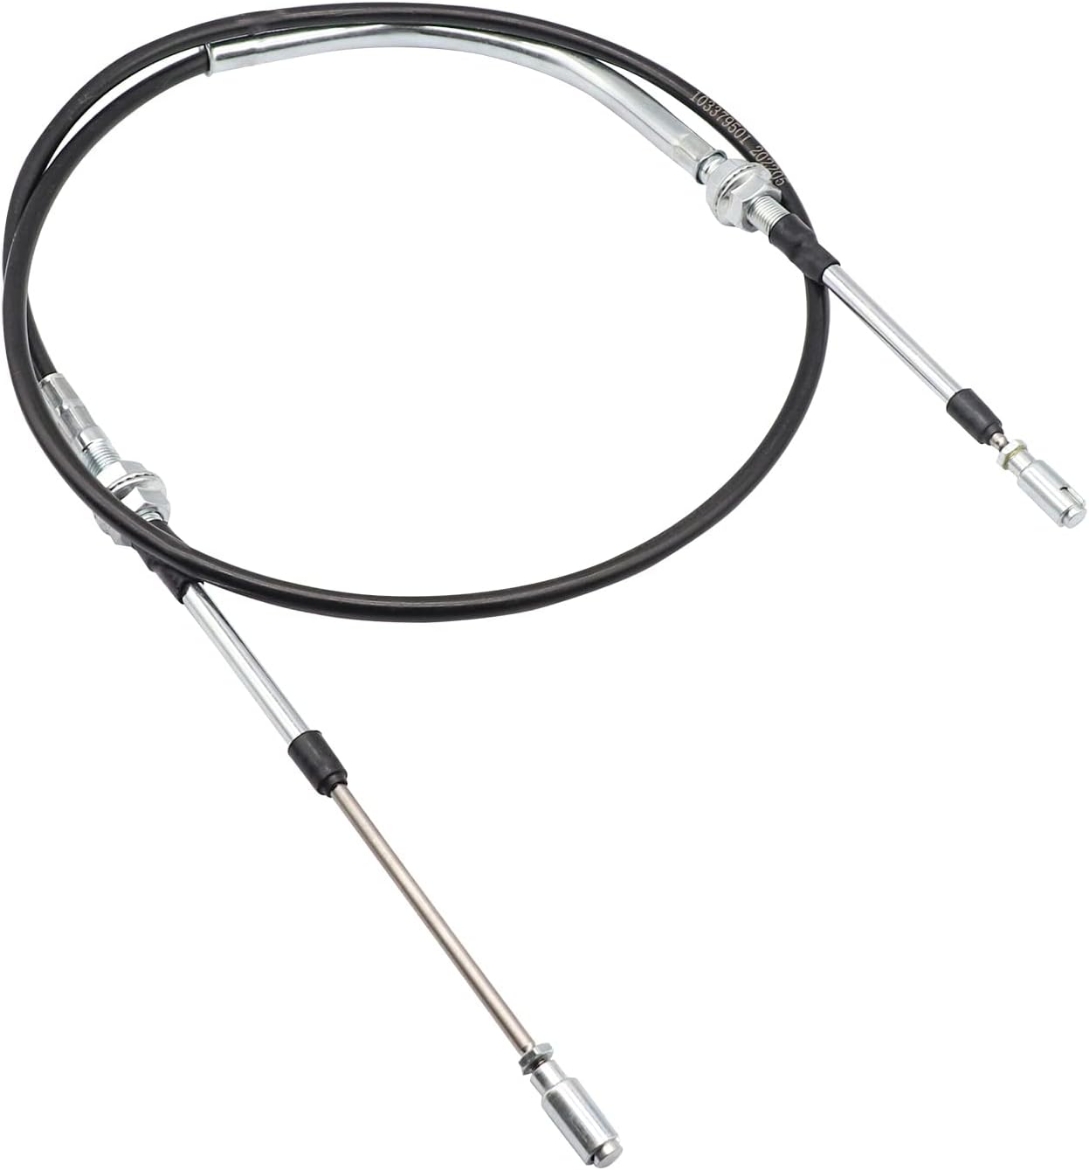 Picture of CLUB CAR DS TRANSMISSION CABLE YEARS (1998-UP)